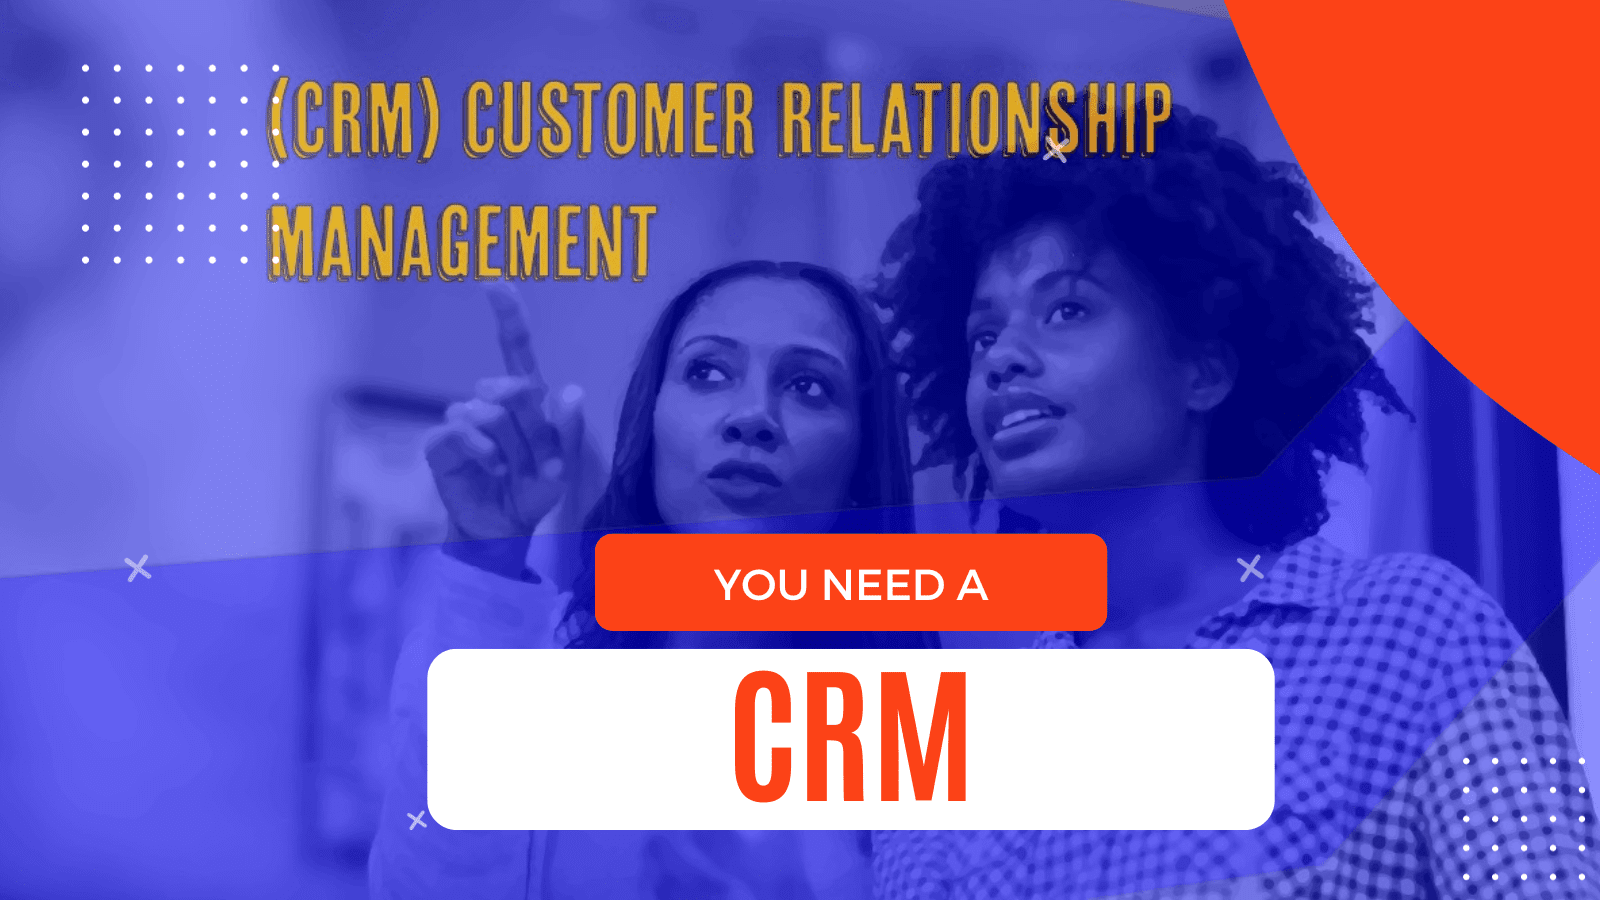 Why you need a CRM